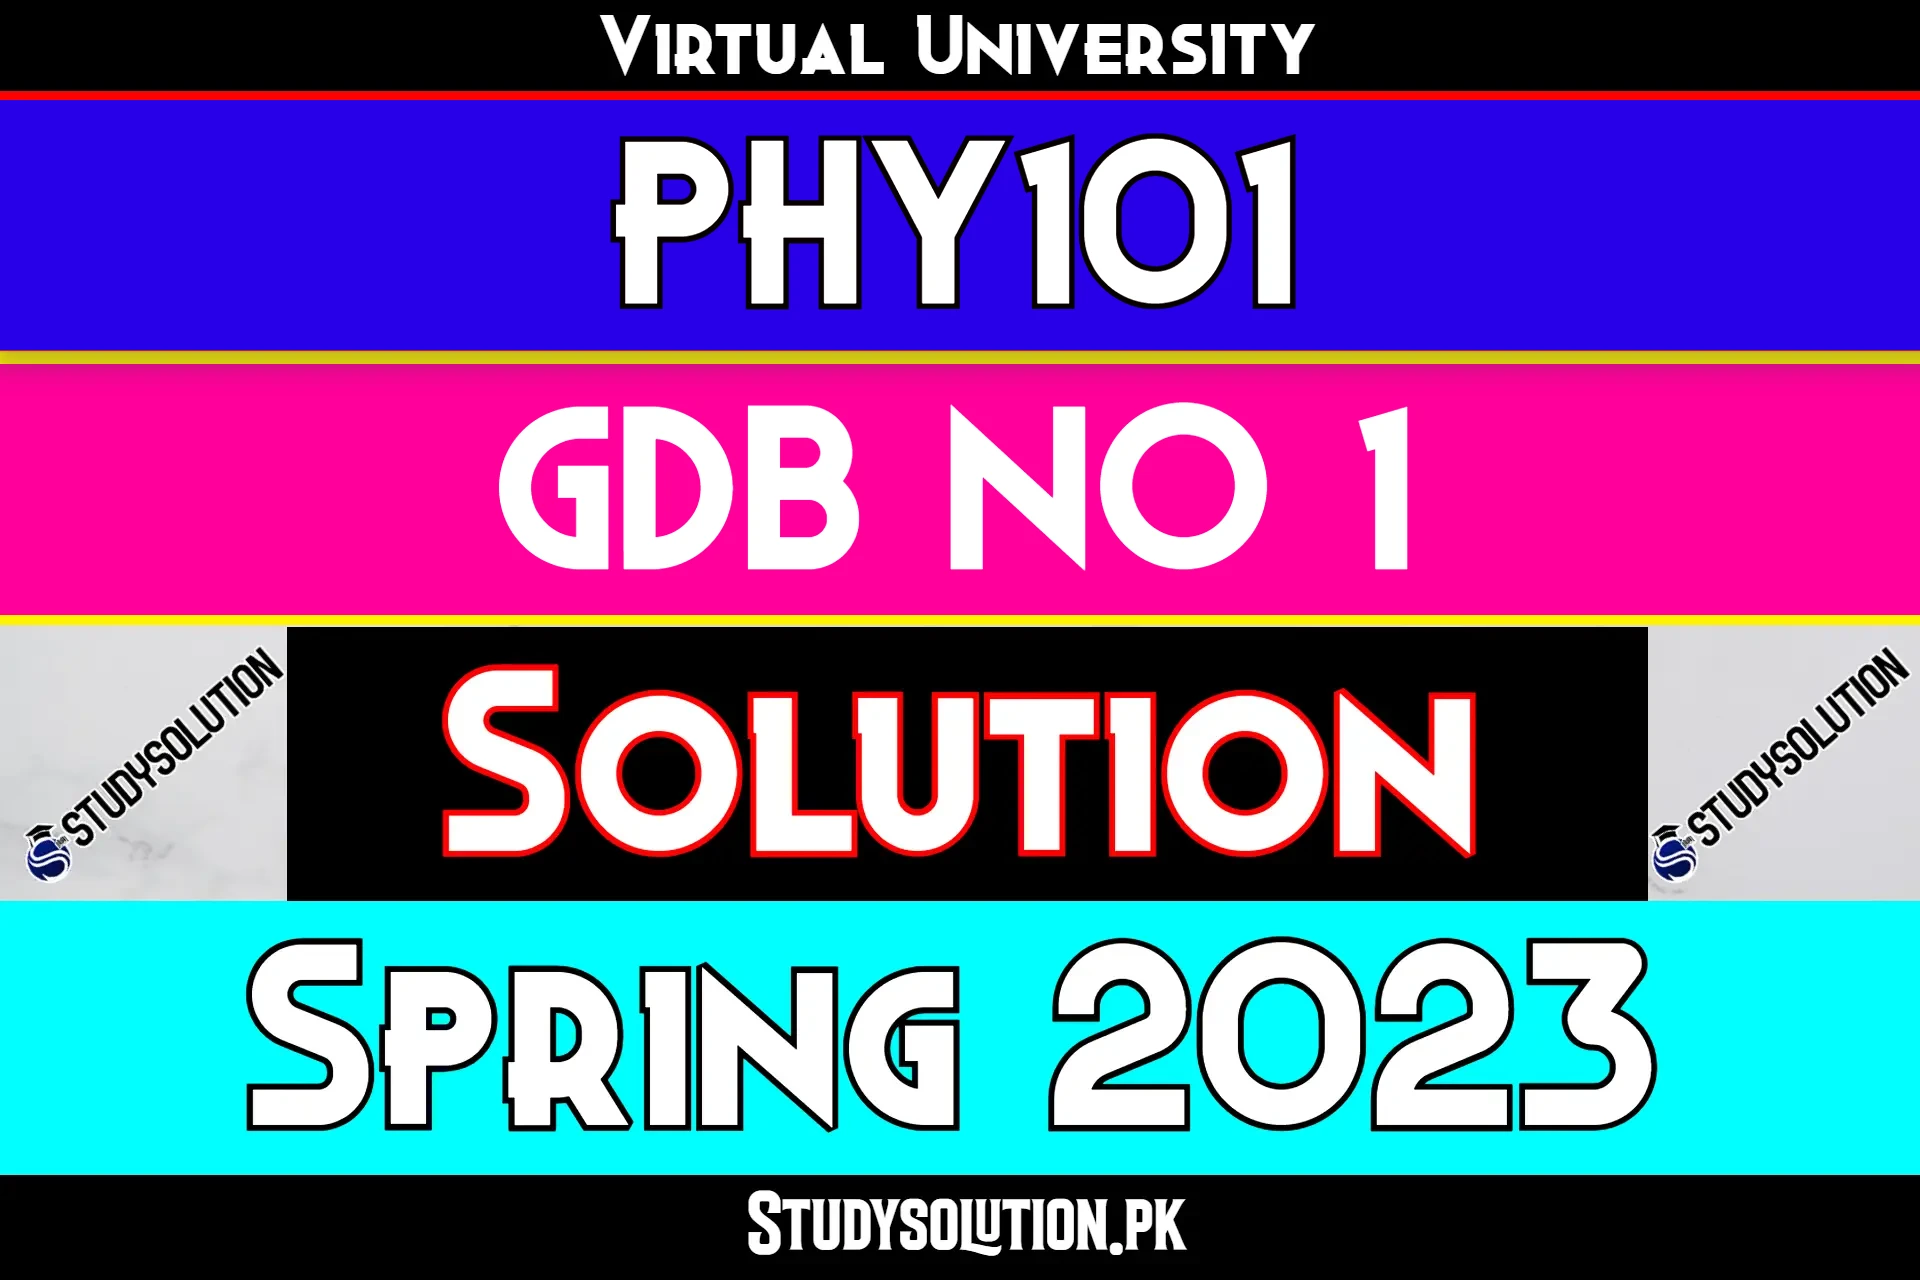 PHY101 GDB No 1 Solution Spring 2023